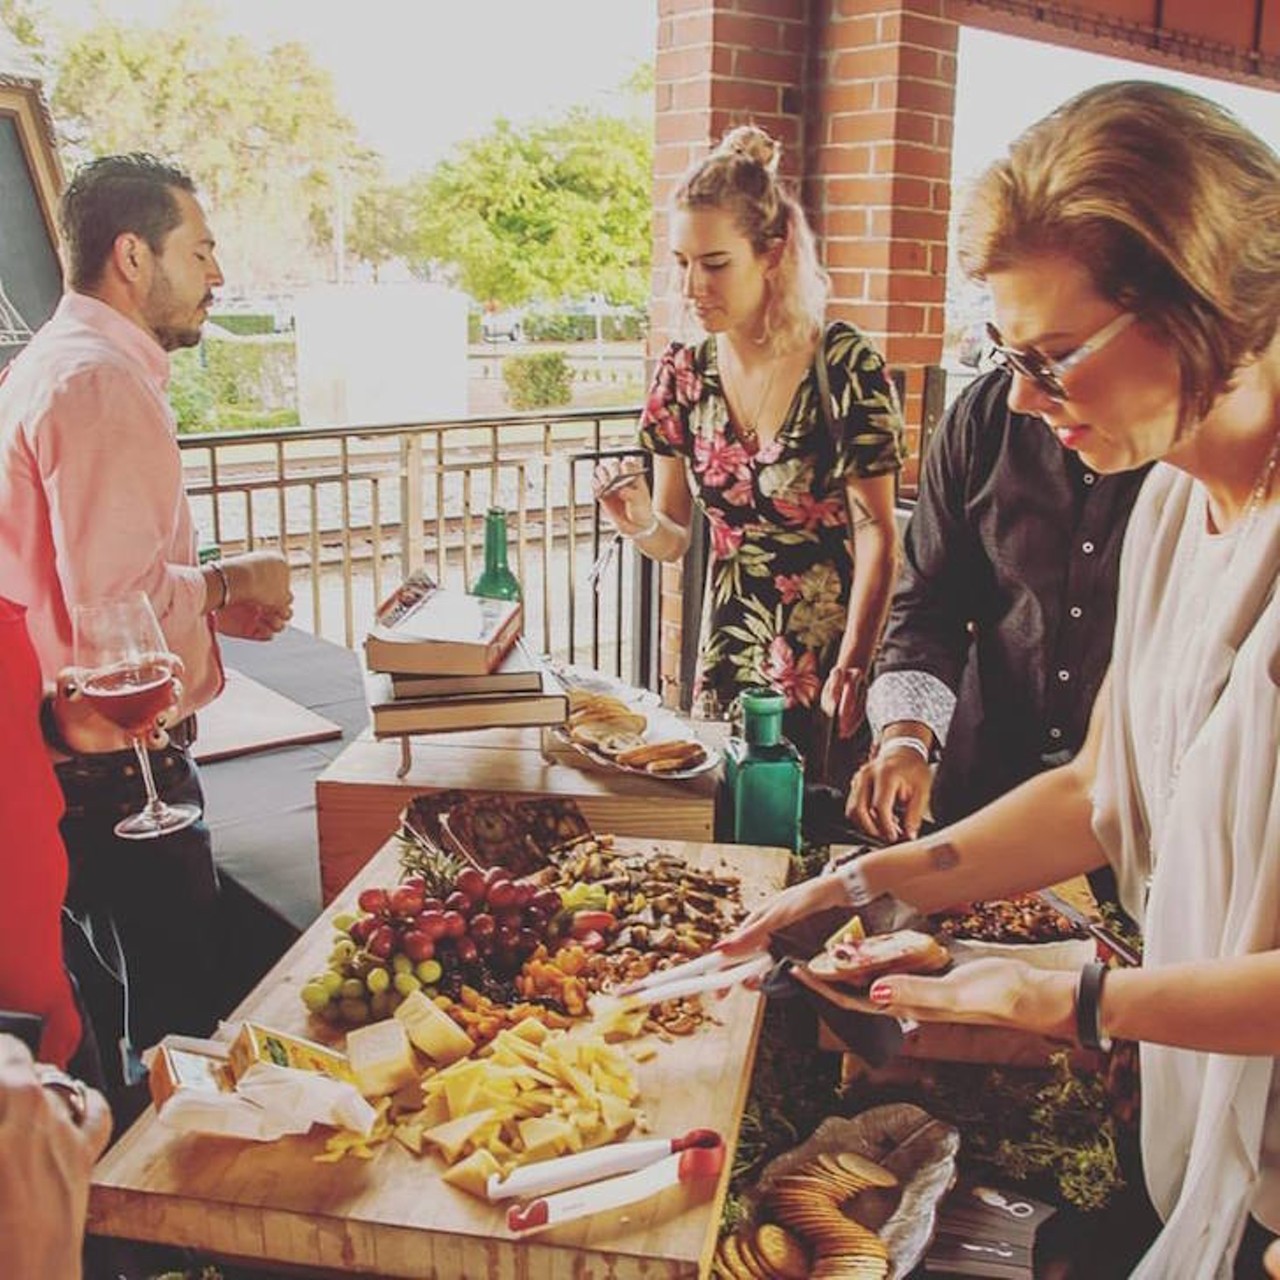 March 20Winter Park Wine & Dine Unlimited tastings from more than 35 restaurants, plus craft beers, wine and live music. 6:30-9:30 pm; Winter Park Farmers Market, 200 W. New England Ave., Winter Park; $44-$74.Photo via Winter Park Events/Facebook